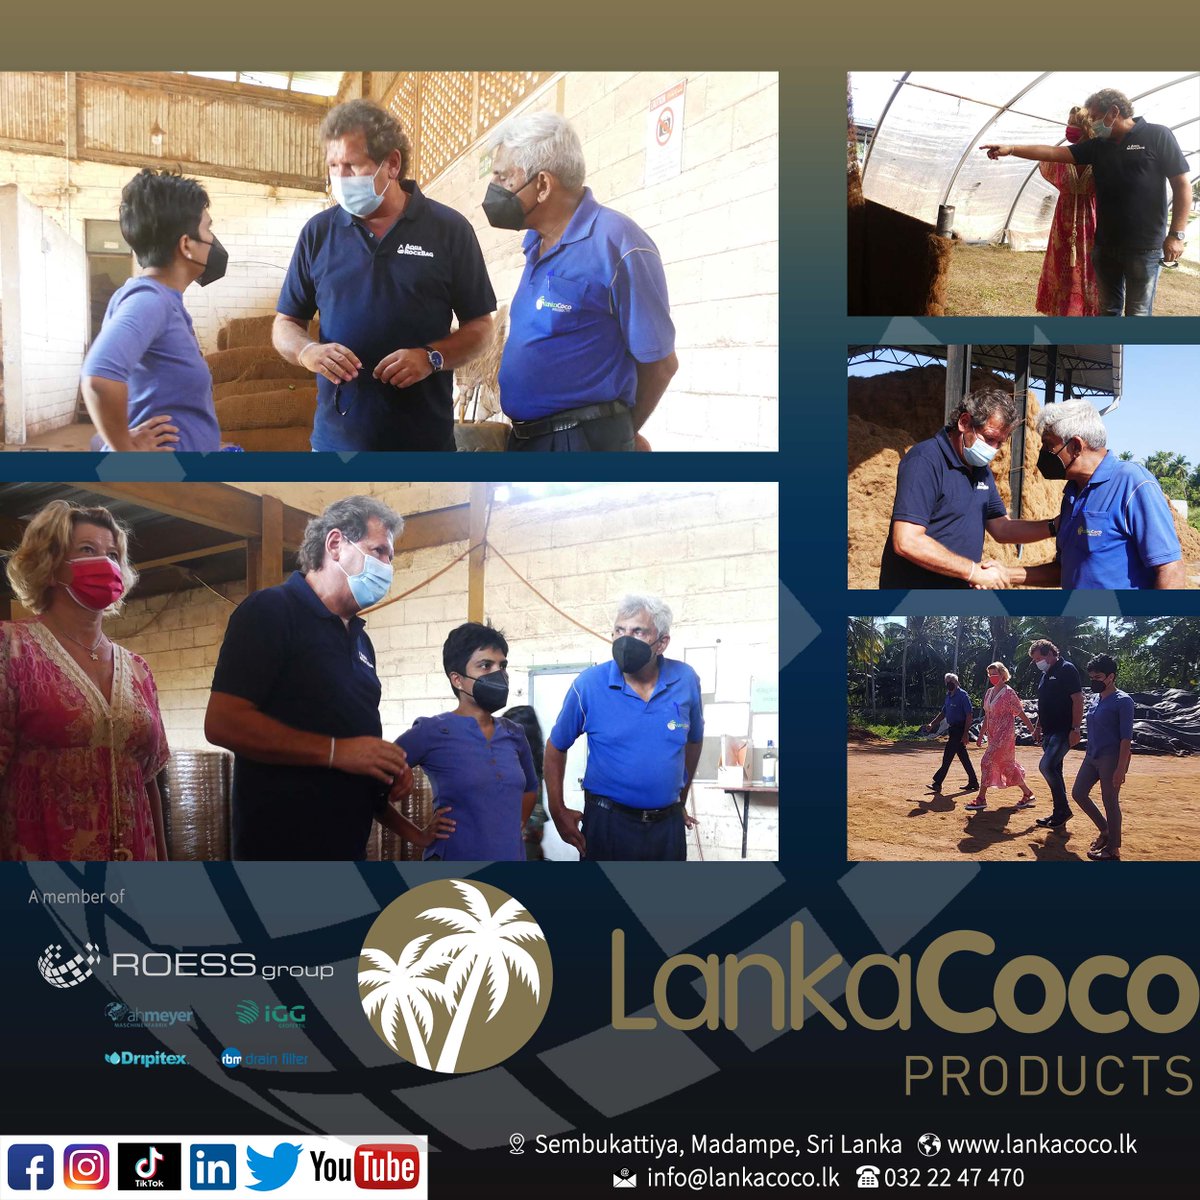 Mr. Thomas Roess, one of the Directors of Lanka Coco, recently visited the company with Ms.Anja Ferdinand. Our CEO, Ms. Trisha, and the Production Manager, Mr.Chanaka accompanied them.

Here are some of the memories while they were with us.#lankacocoproducts #roessgroup #erosion